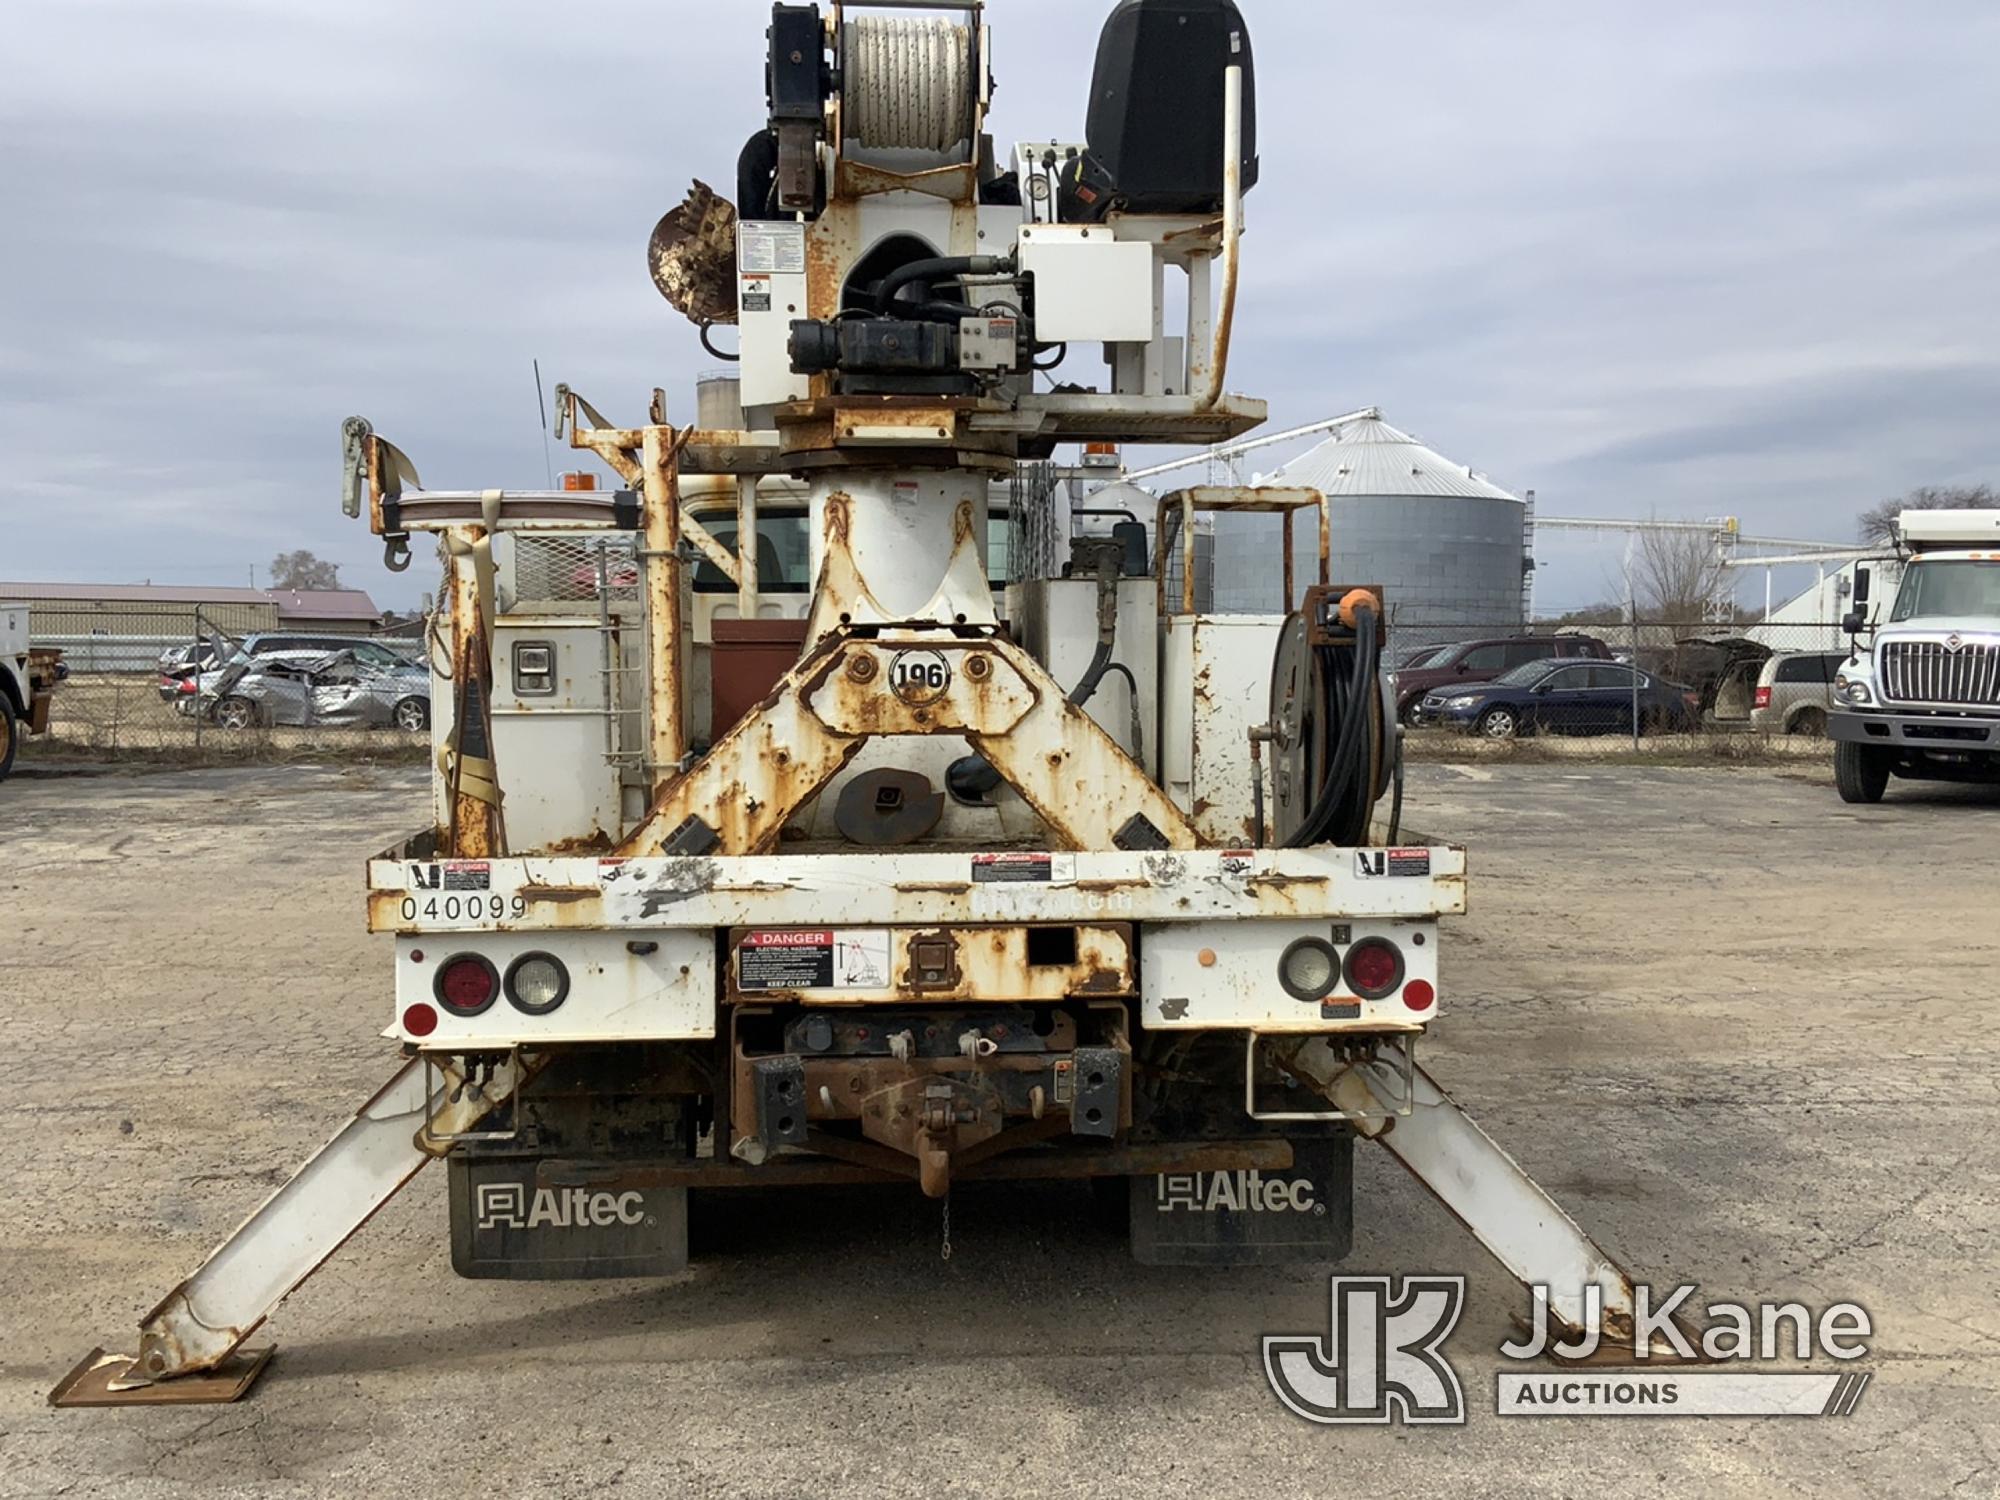 (South Beloit, IL) Altec DC47-TR, Digger Derrick rear mounted on 2018 Freightliner M2 106 Utility Tr